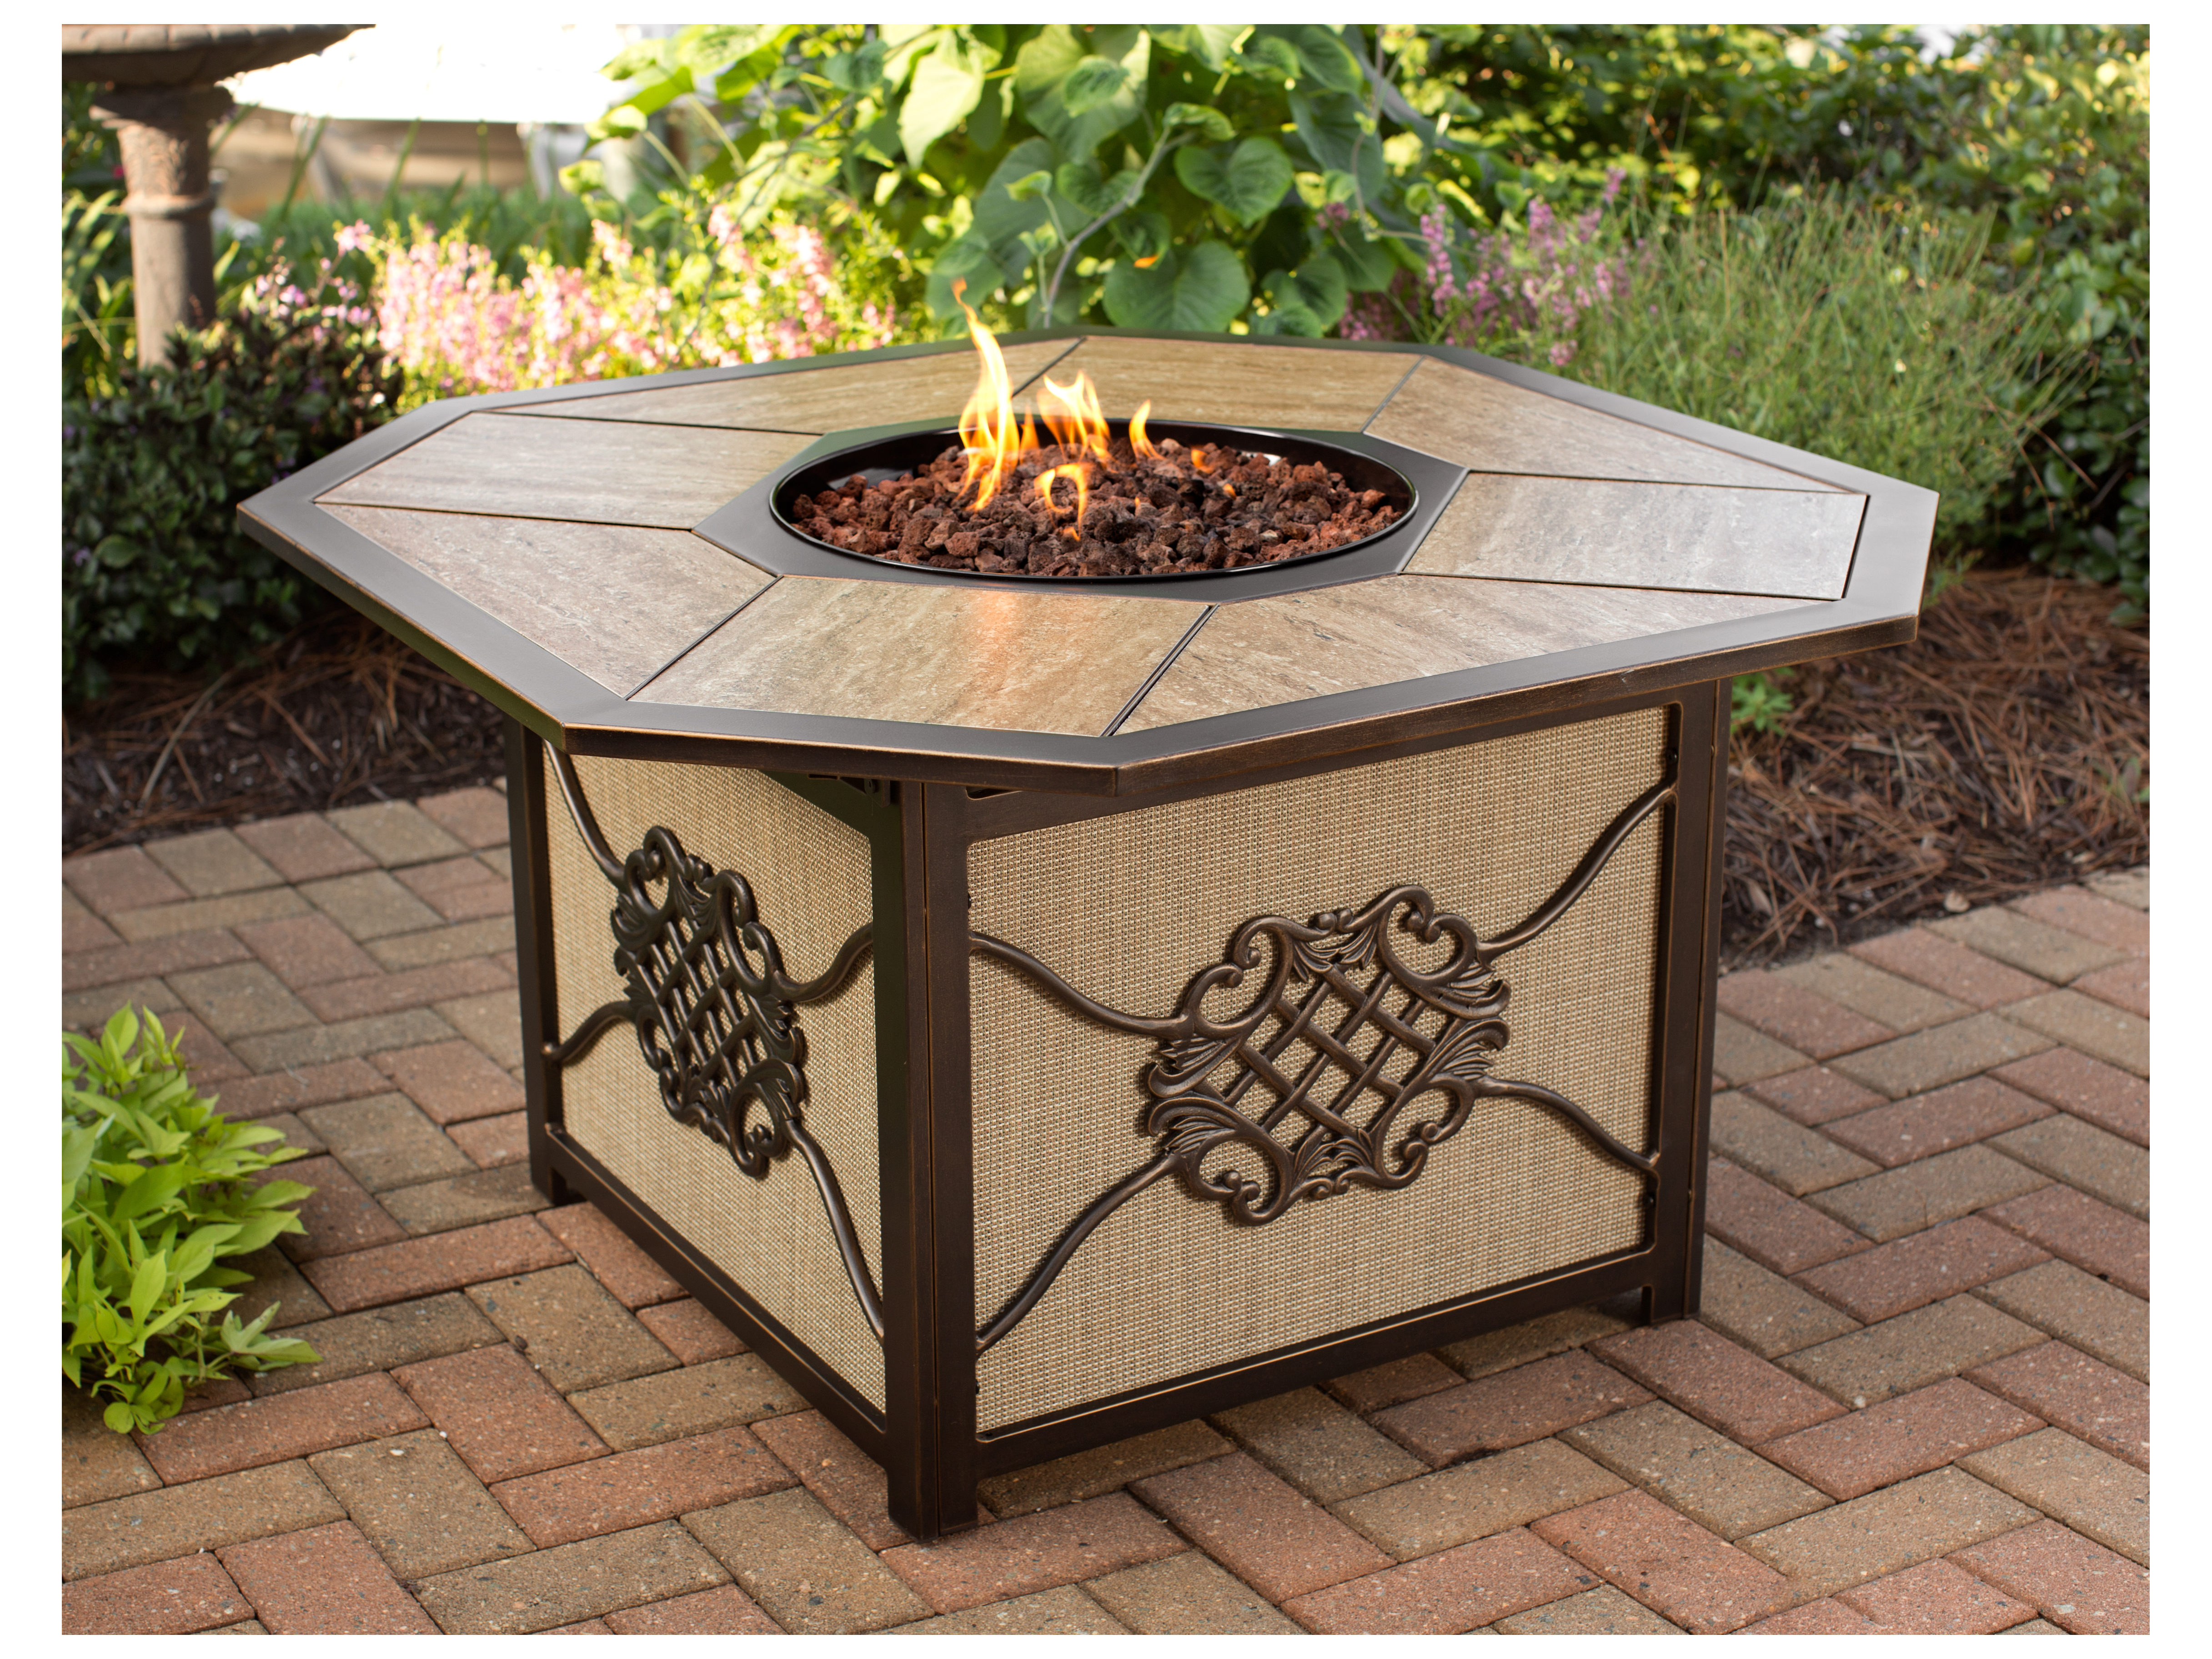 Oakland Living Heritage Aluminum 43 25 Octagon Gas Firepit Table With Porcelain Inlaid Top Ol8211oct4324gstab